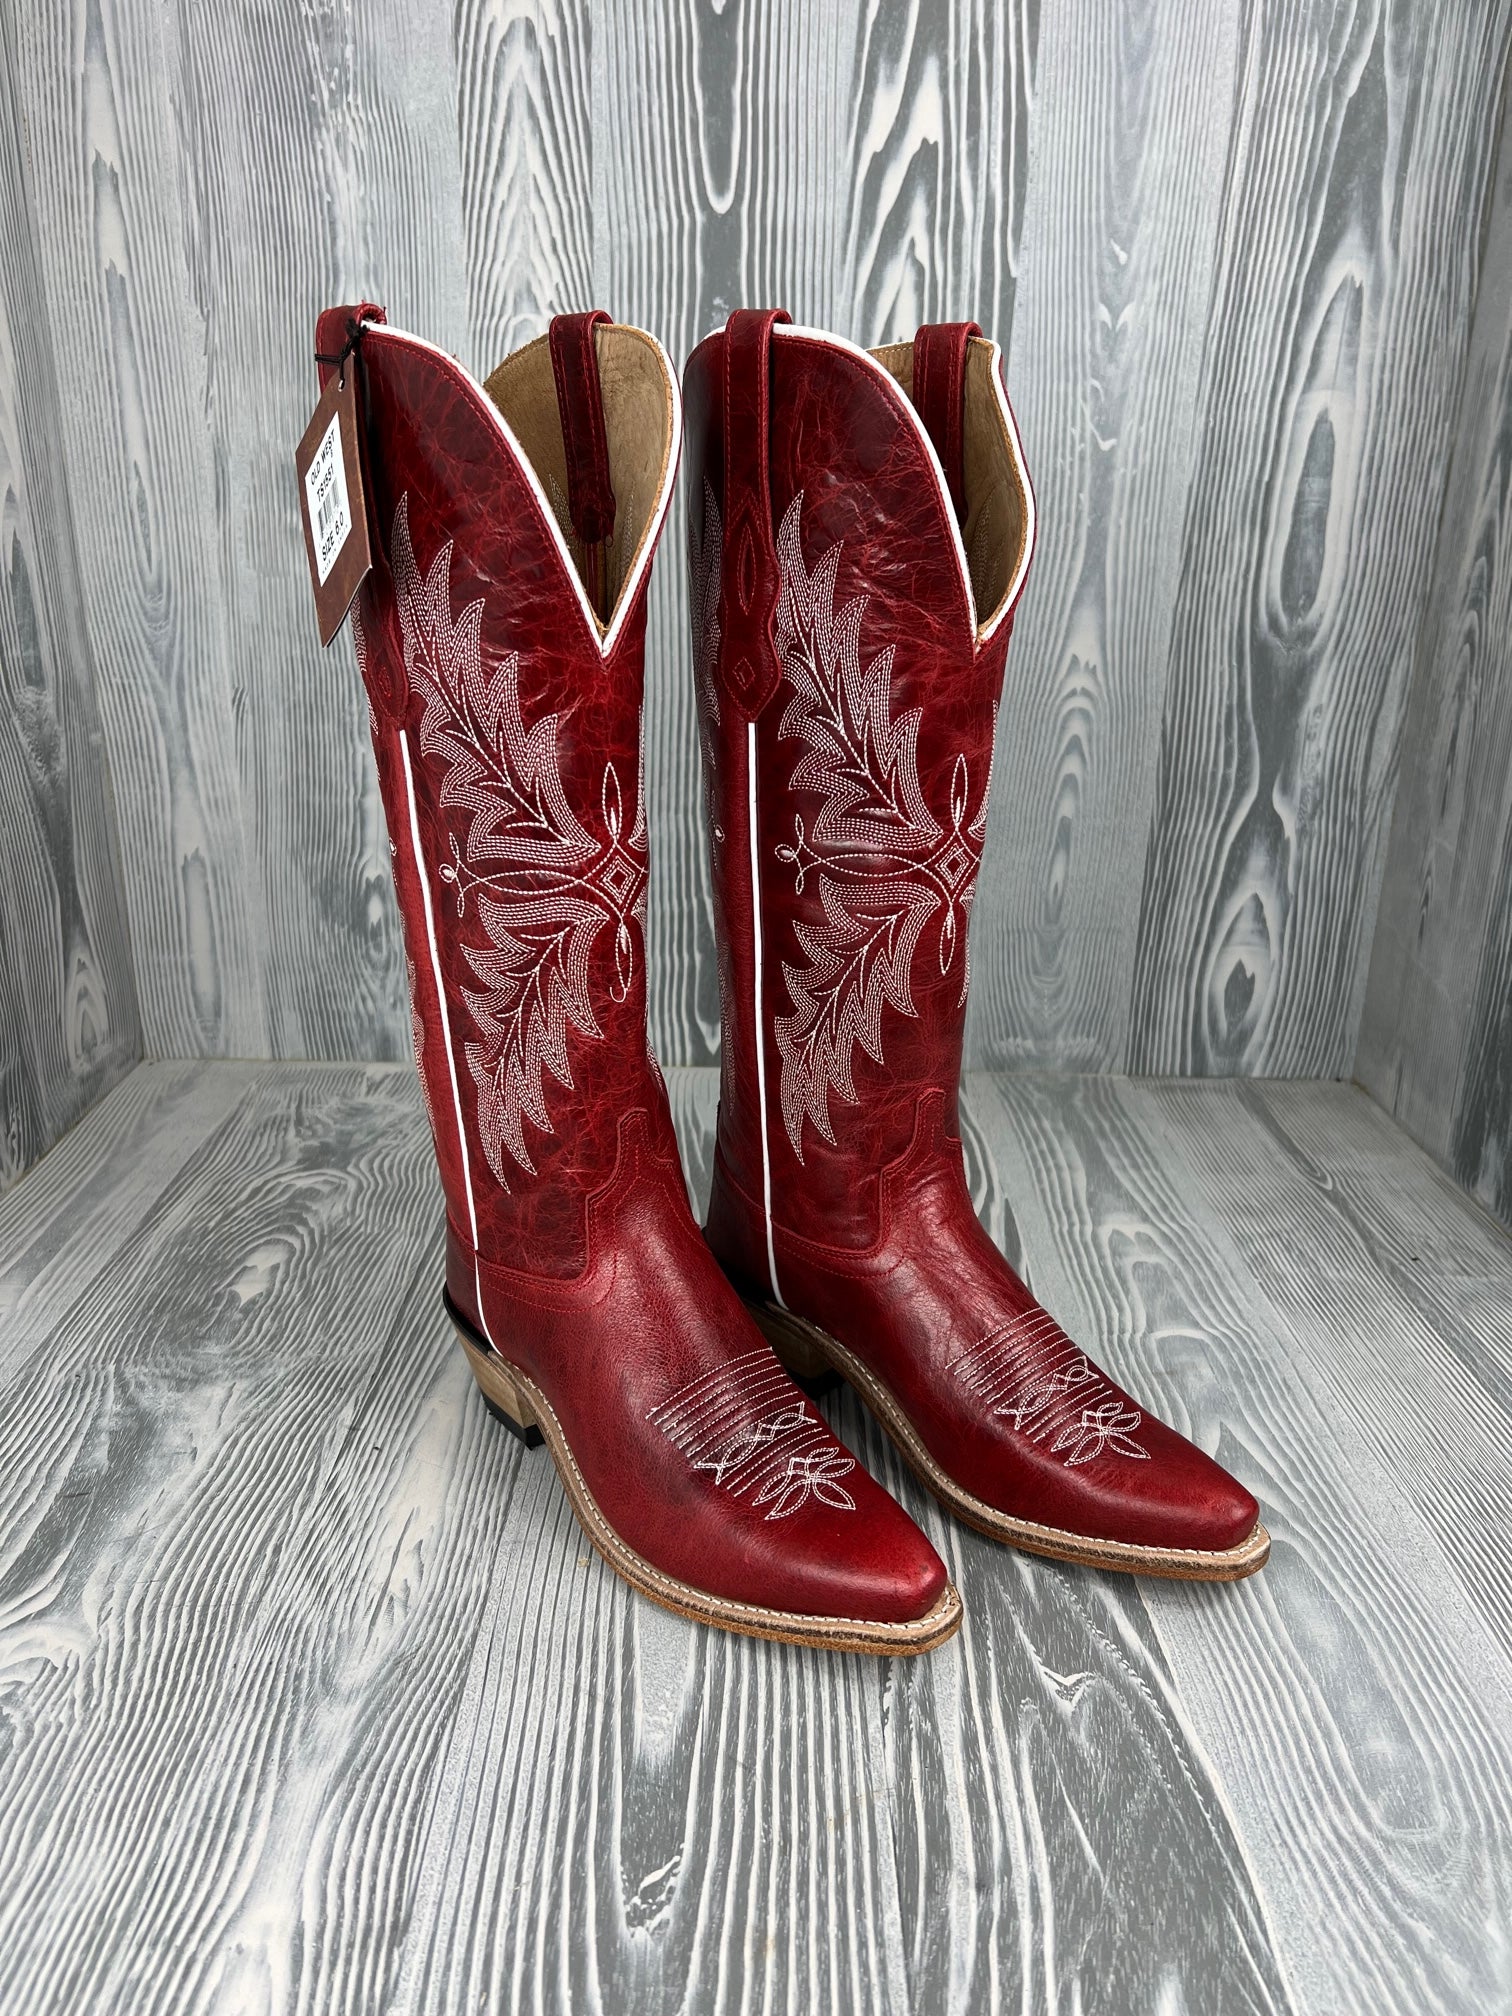 Pasuot Cowboy Boots for Women-Red Cowgirl Western